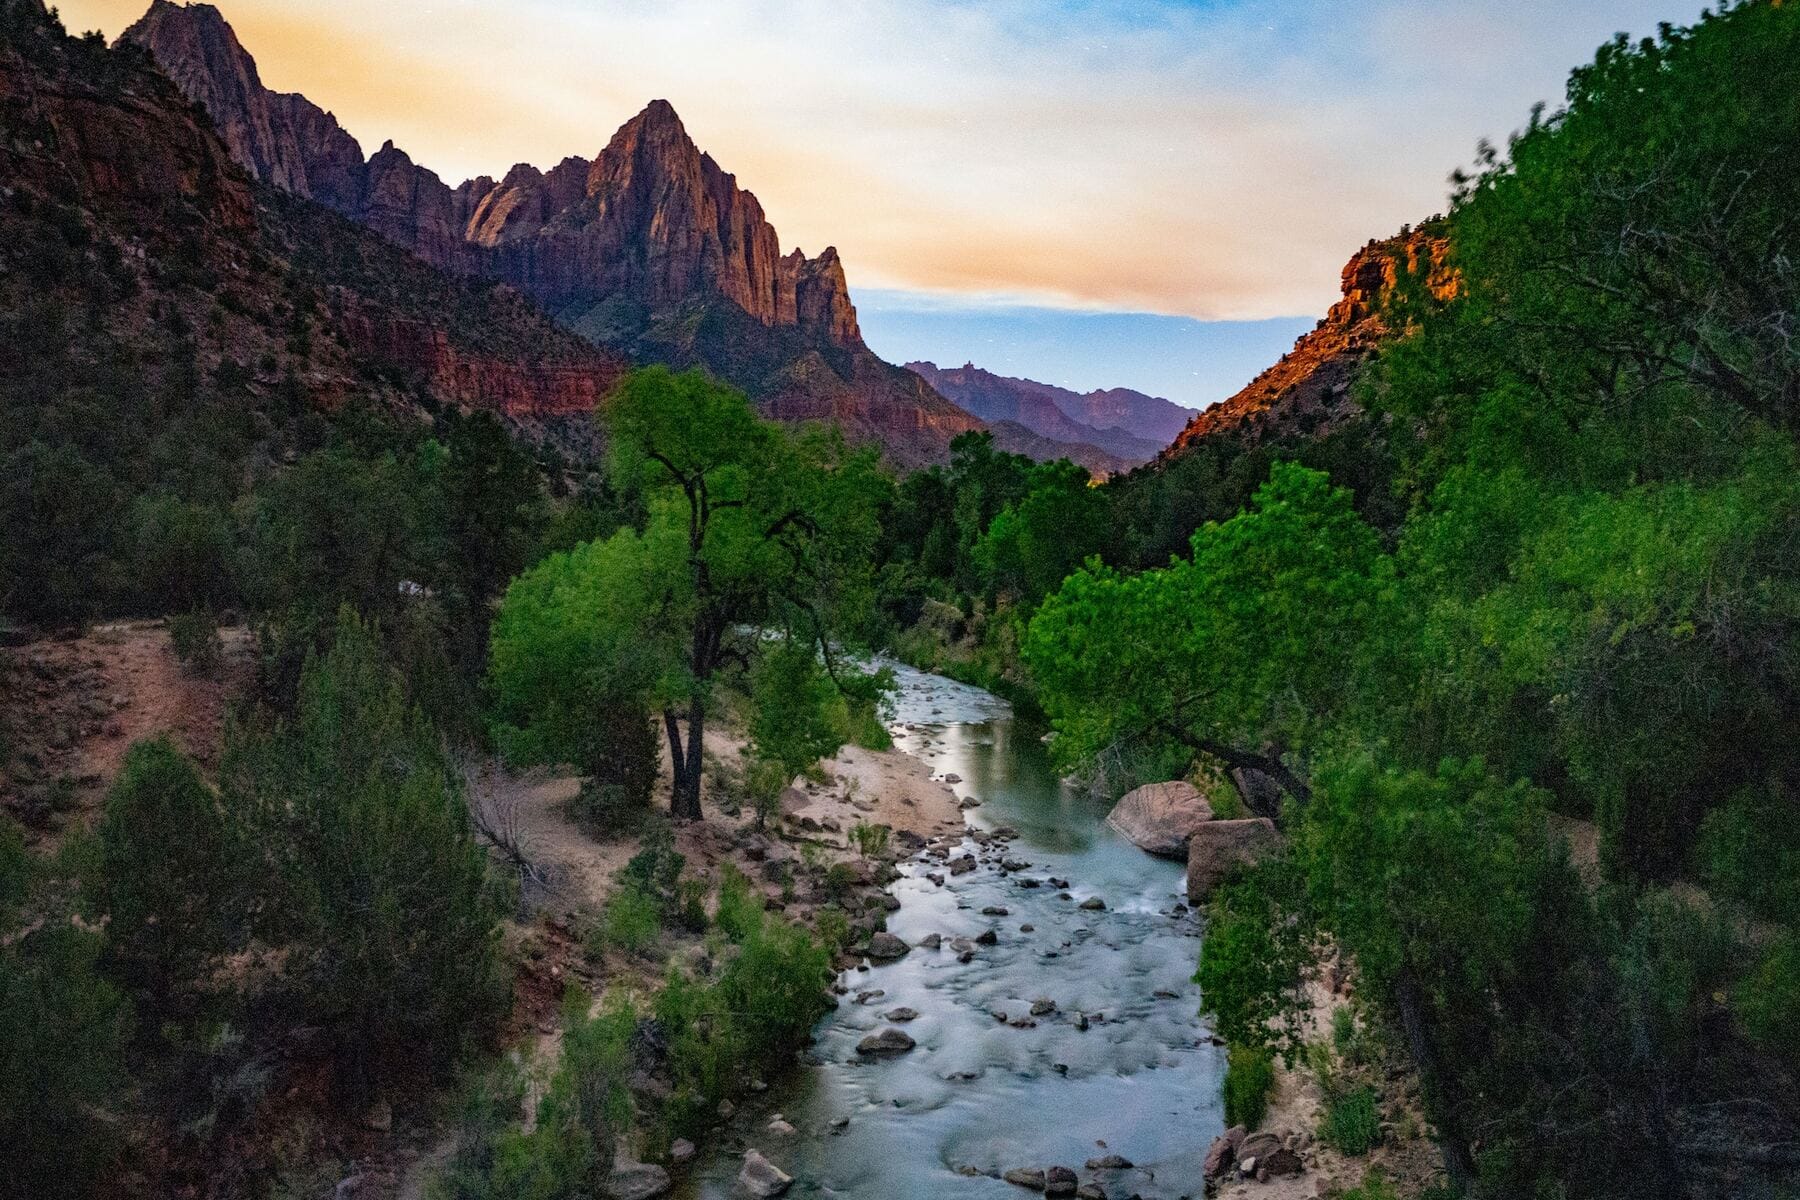 Image of Zion National Park in Utah - Book Outdoors